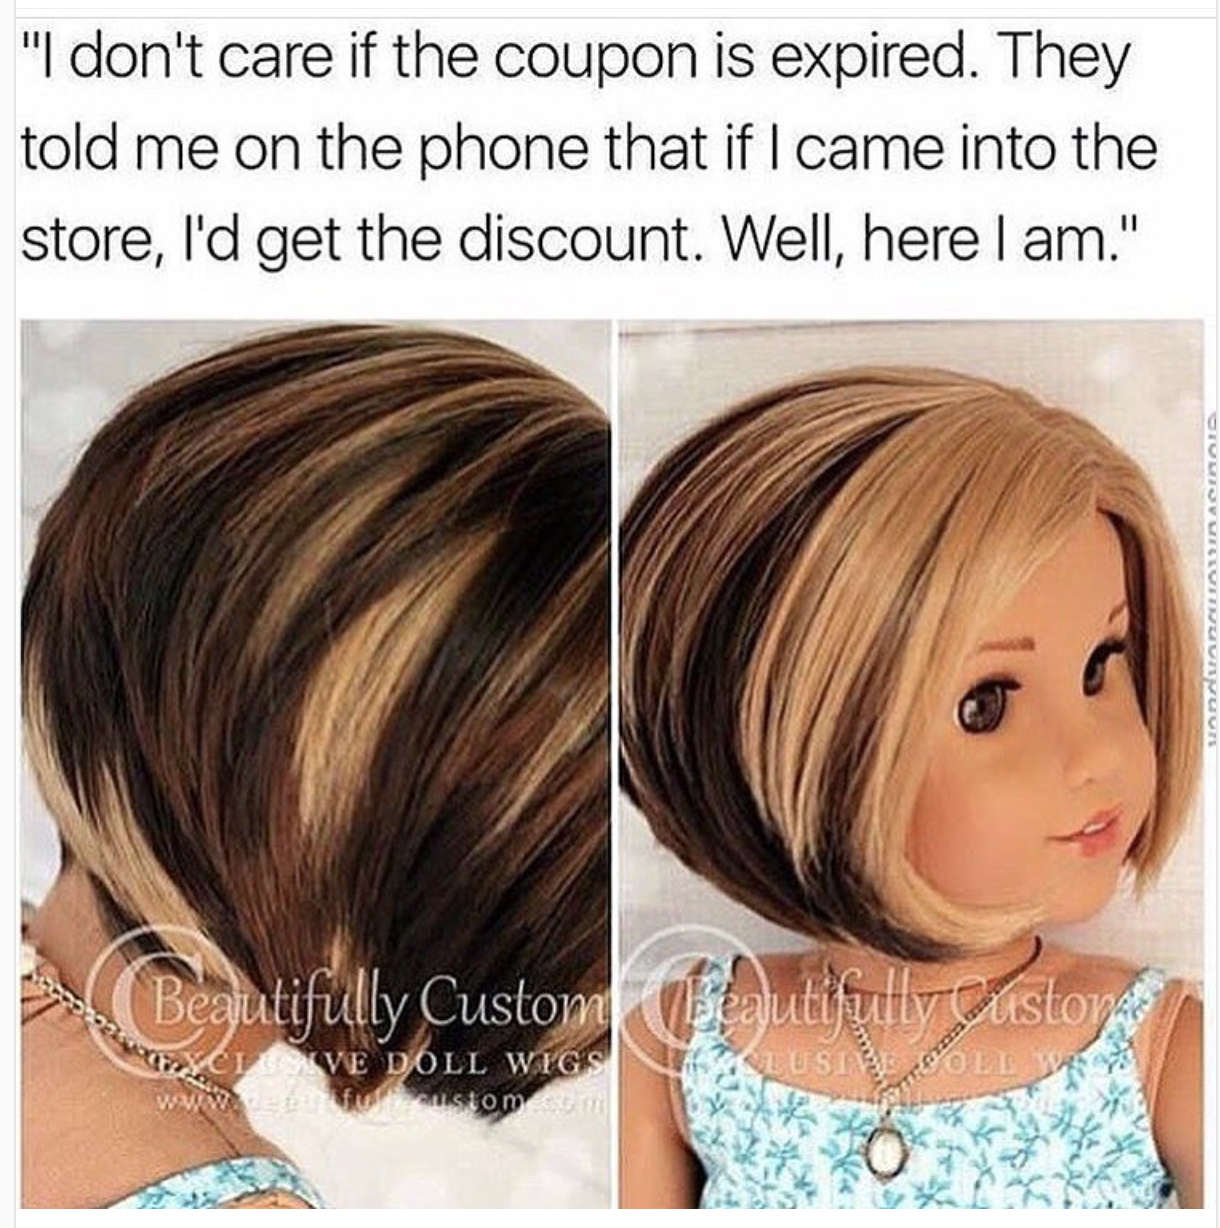 can i speak with your manager - "I don't care if the coupon is expired. They told me on the phone that if I came into the store, I'd get the discount. Well, here I am." Beautifully Custom Ve Doll Wigs Visto 00 Www Son